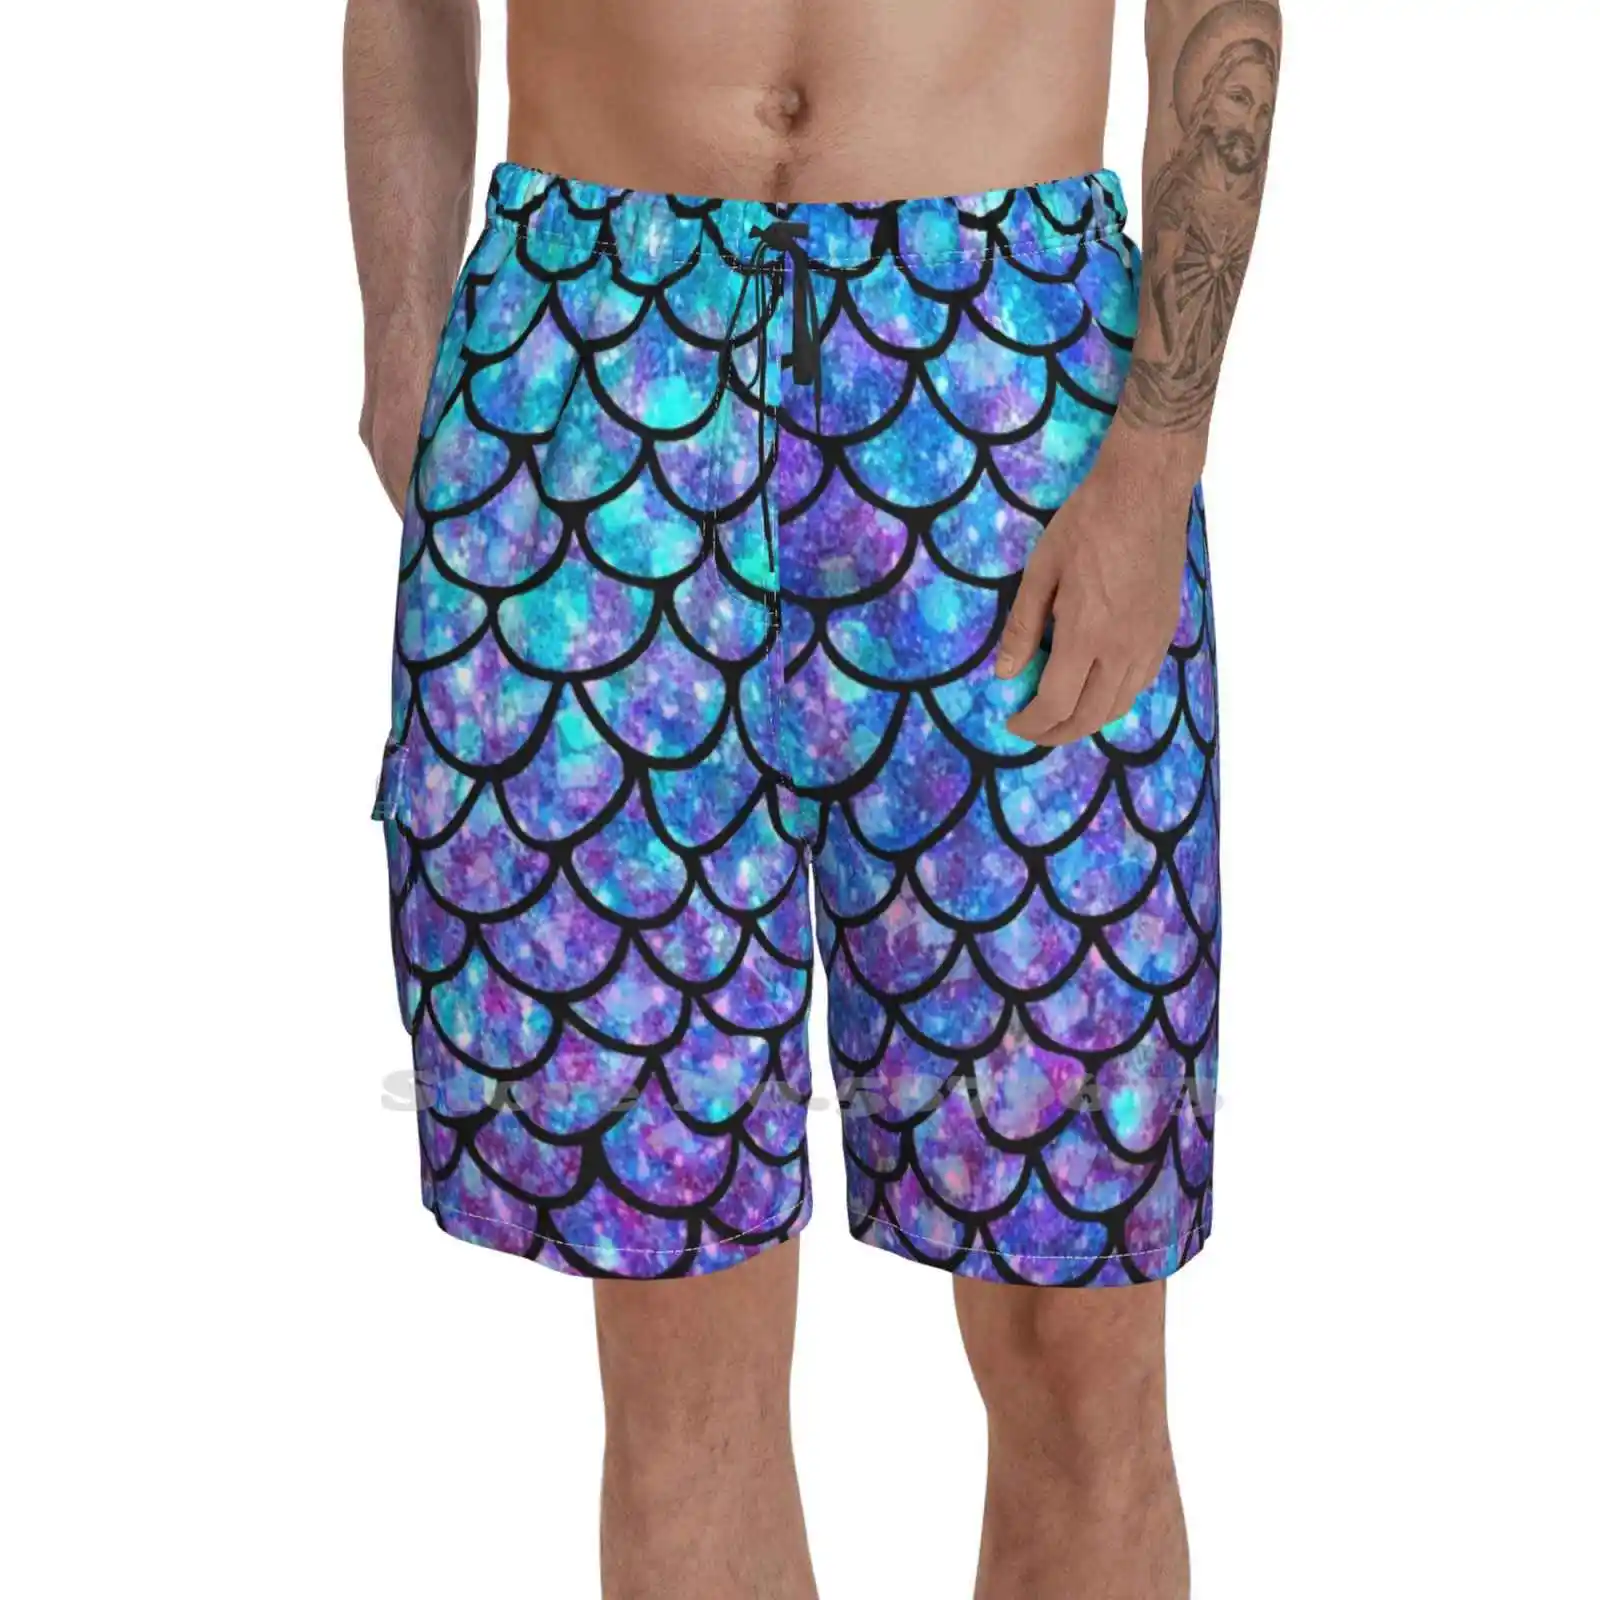 

Purples & Blues Mermaid Scales Fashion New Men'S Beach Shorts Mermaid Fairy Tale Scale Scales Whale Tail Animal Arctic Sea